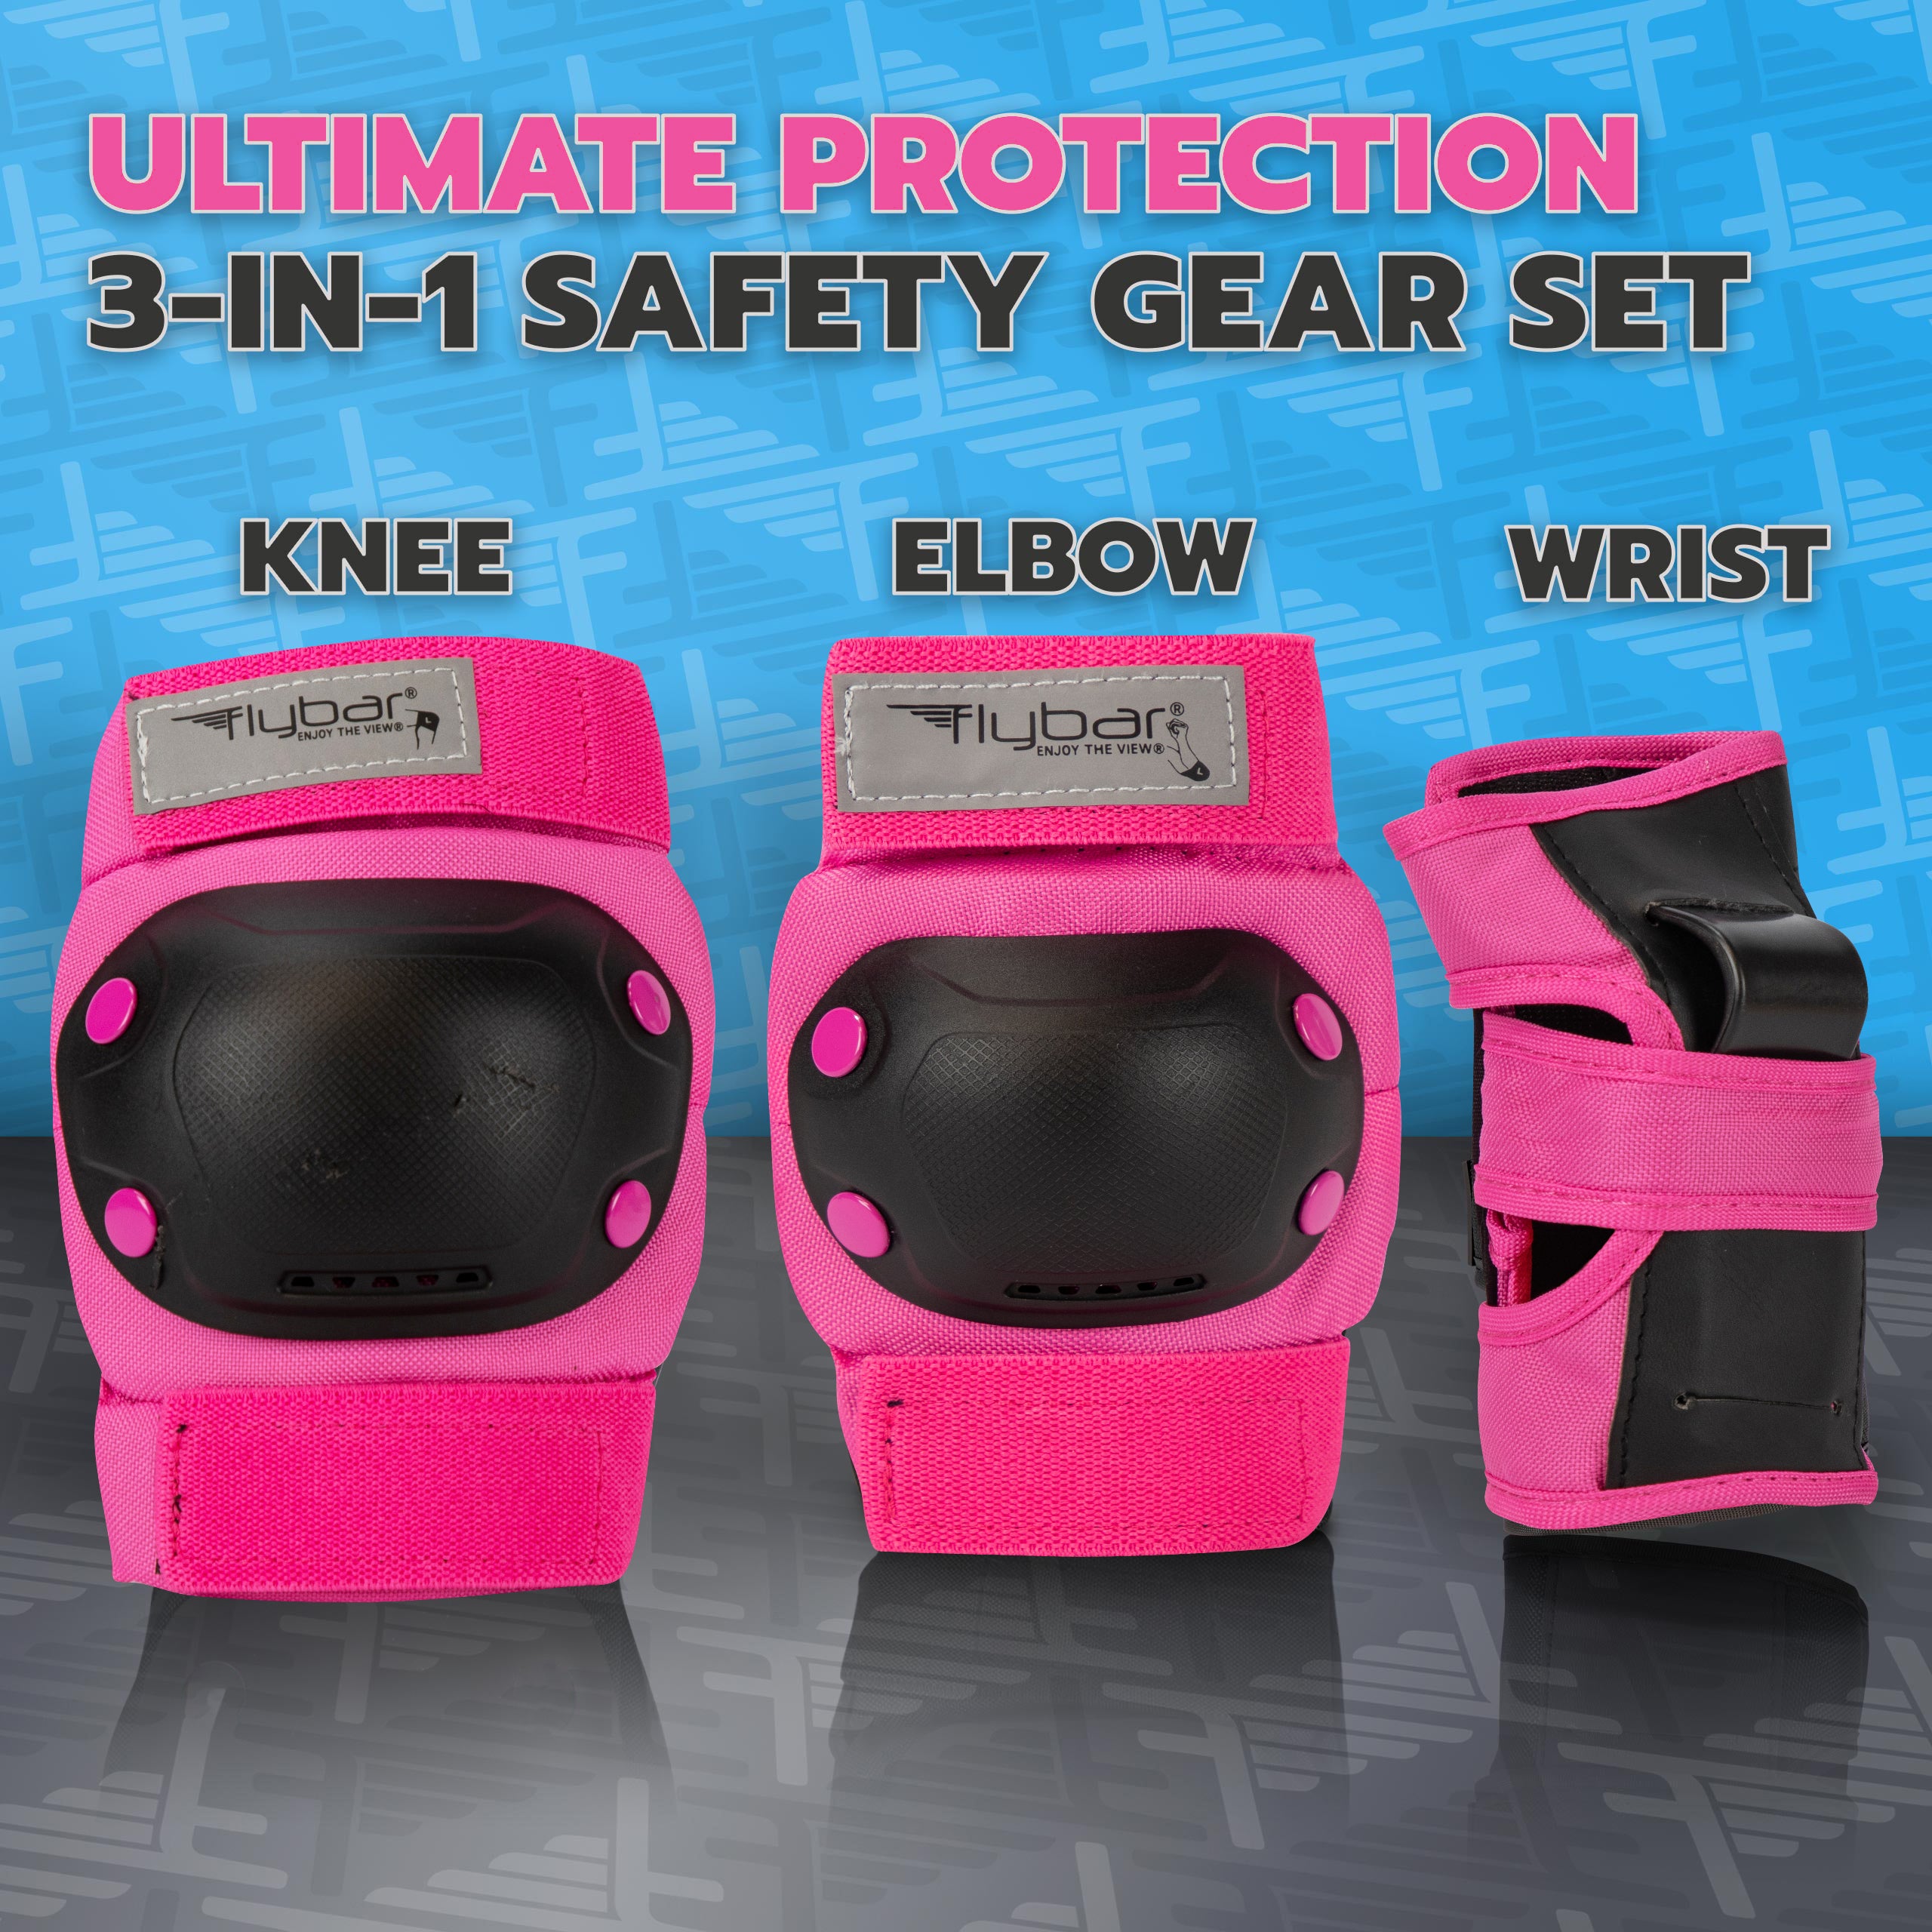 kids outdoor protective gear manufacturer